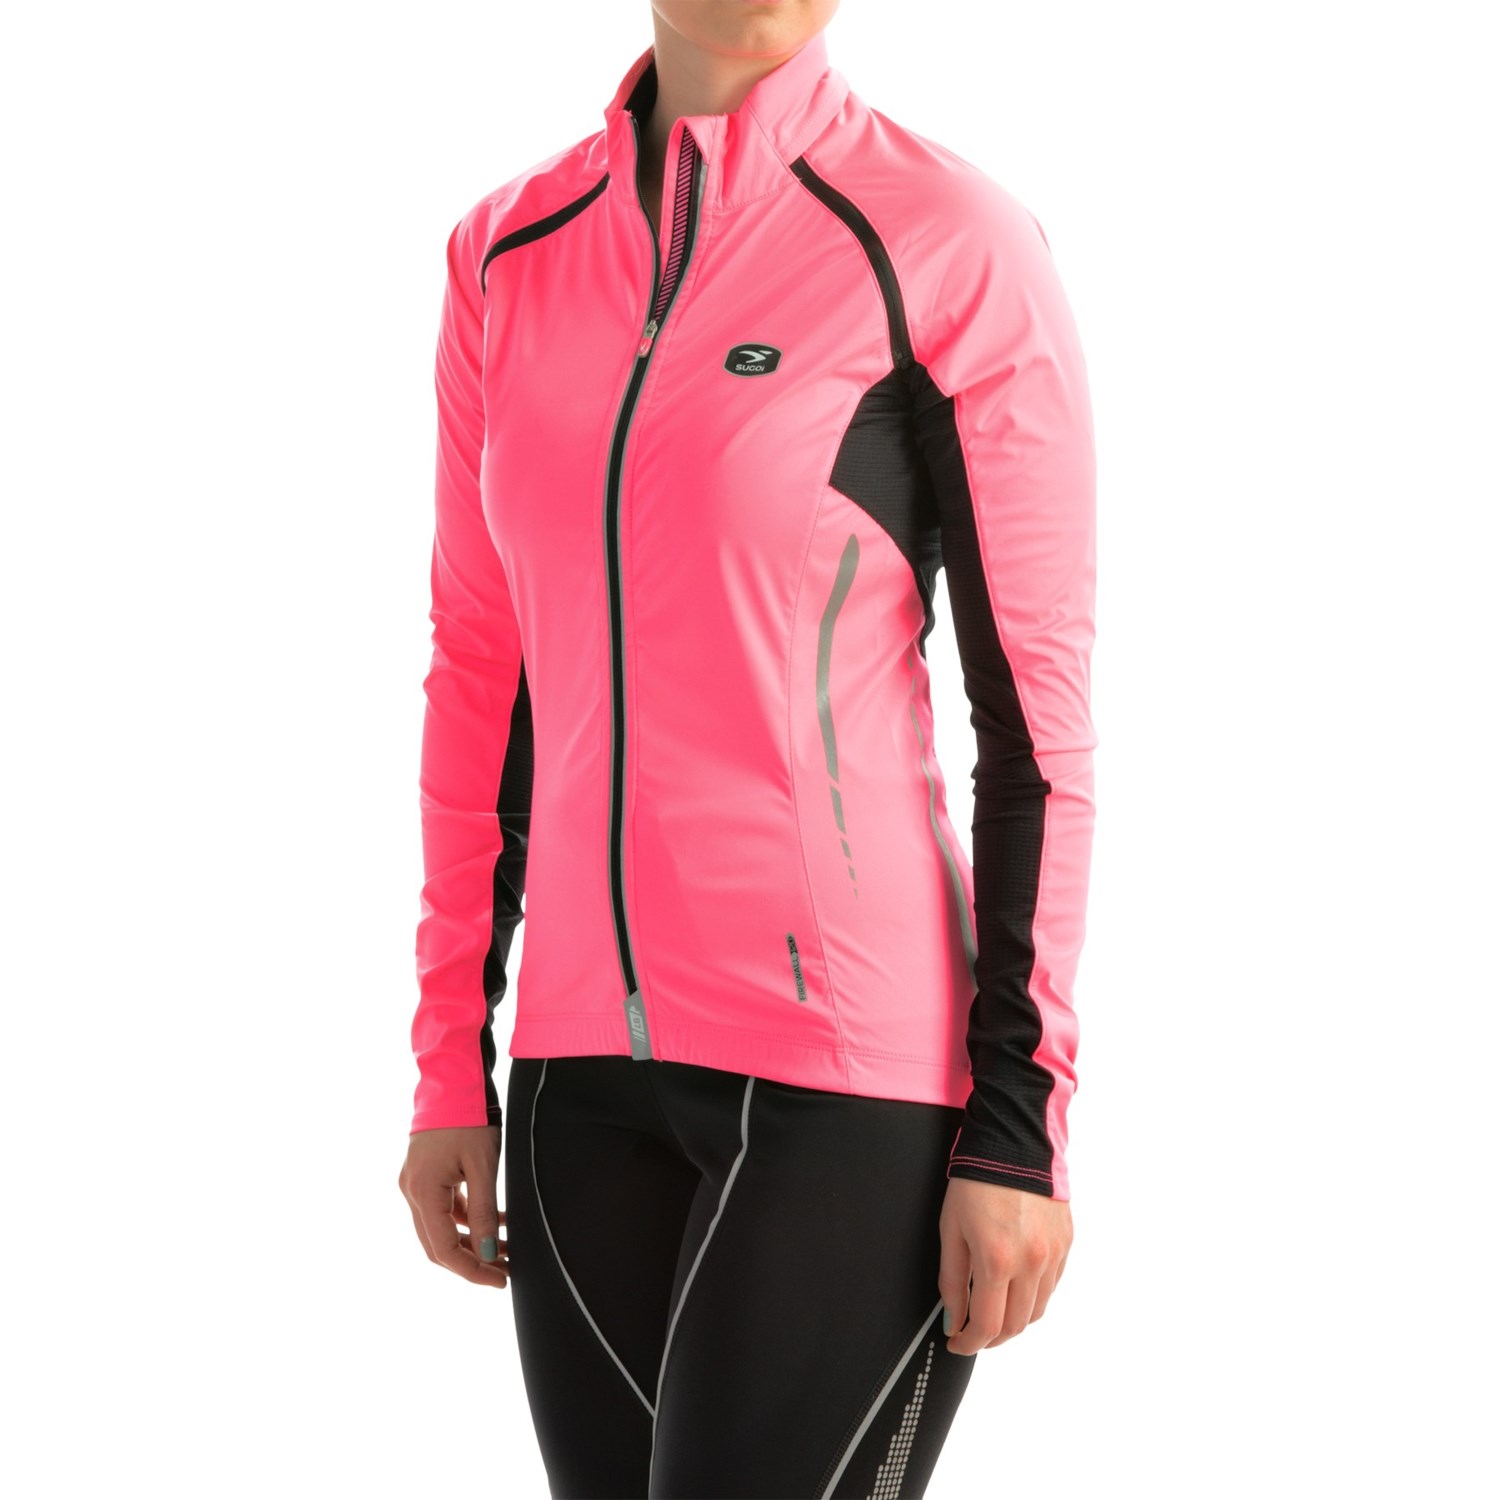 SUGOi RS 120 Full-Zip Convertible Cycling Jacket (For Women) - Save 60%